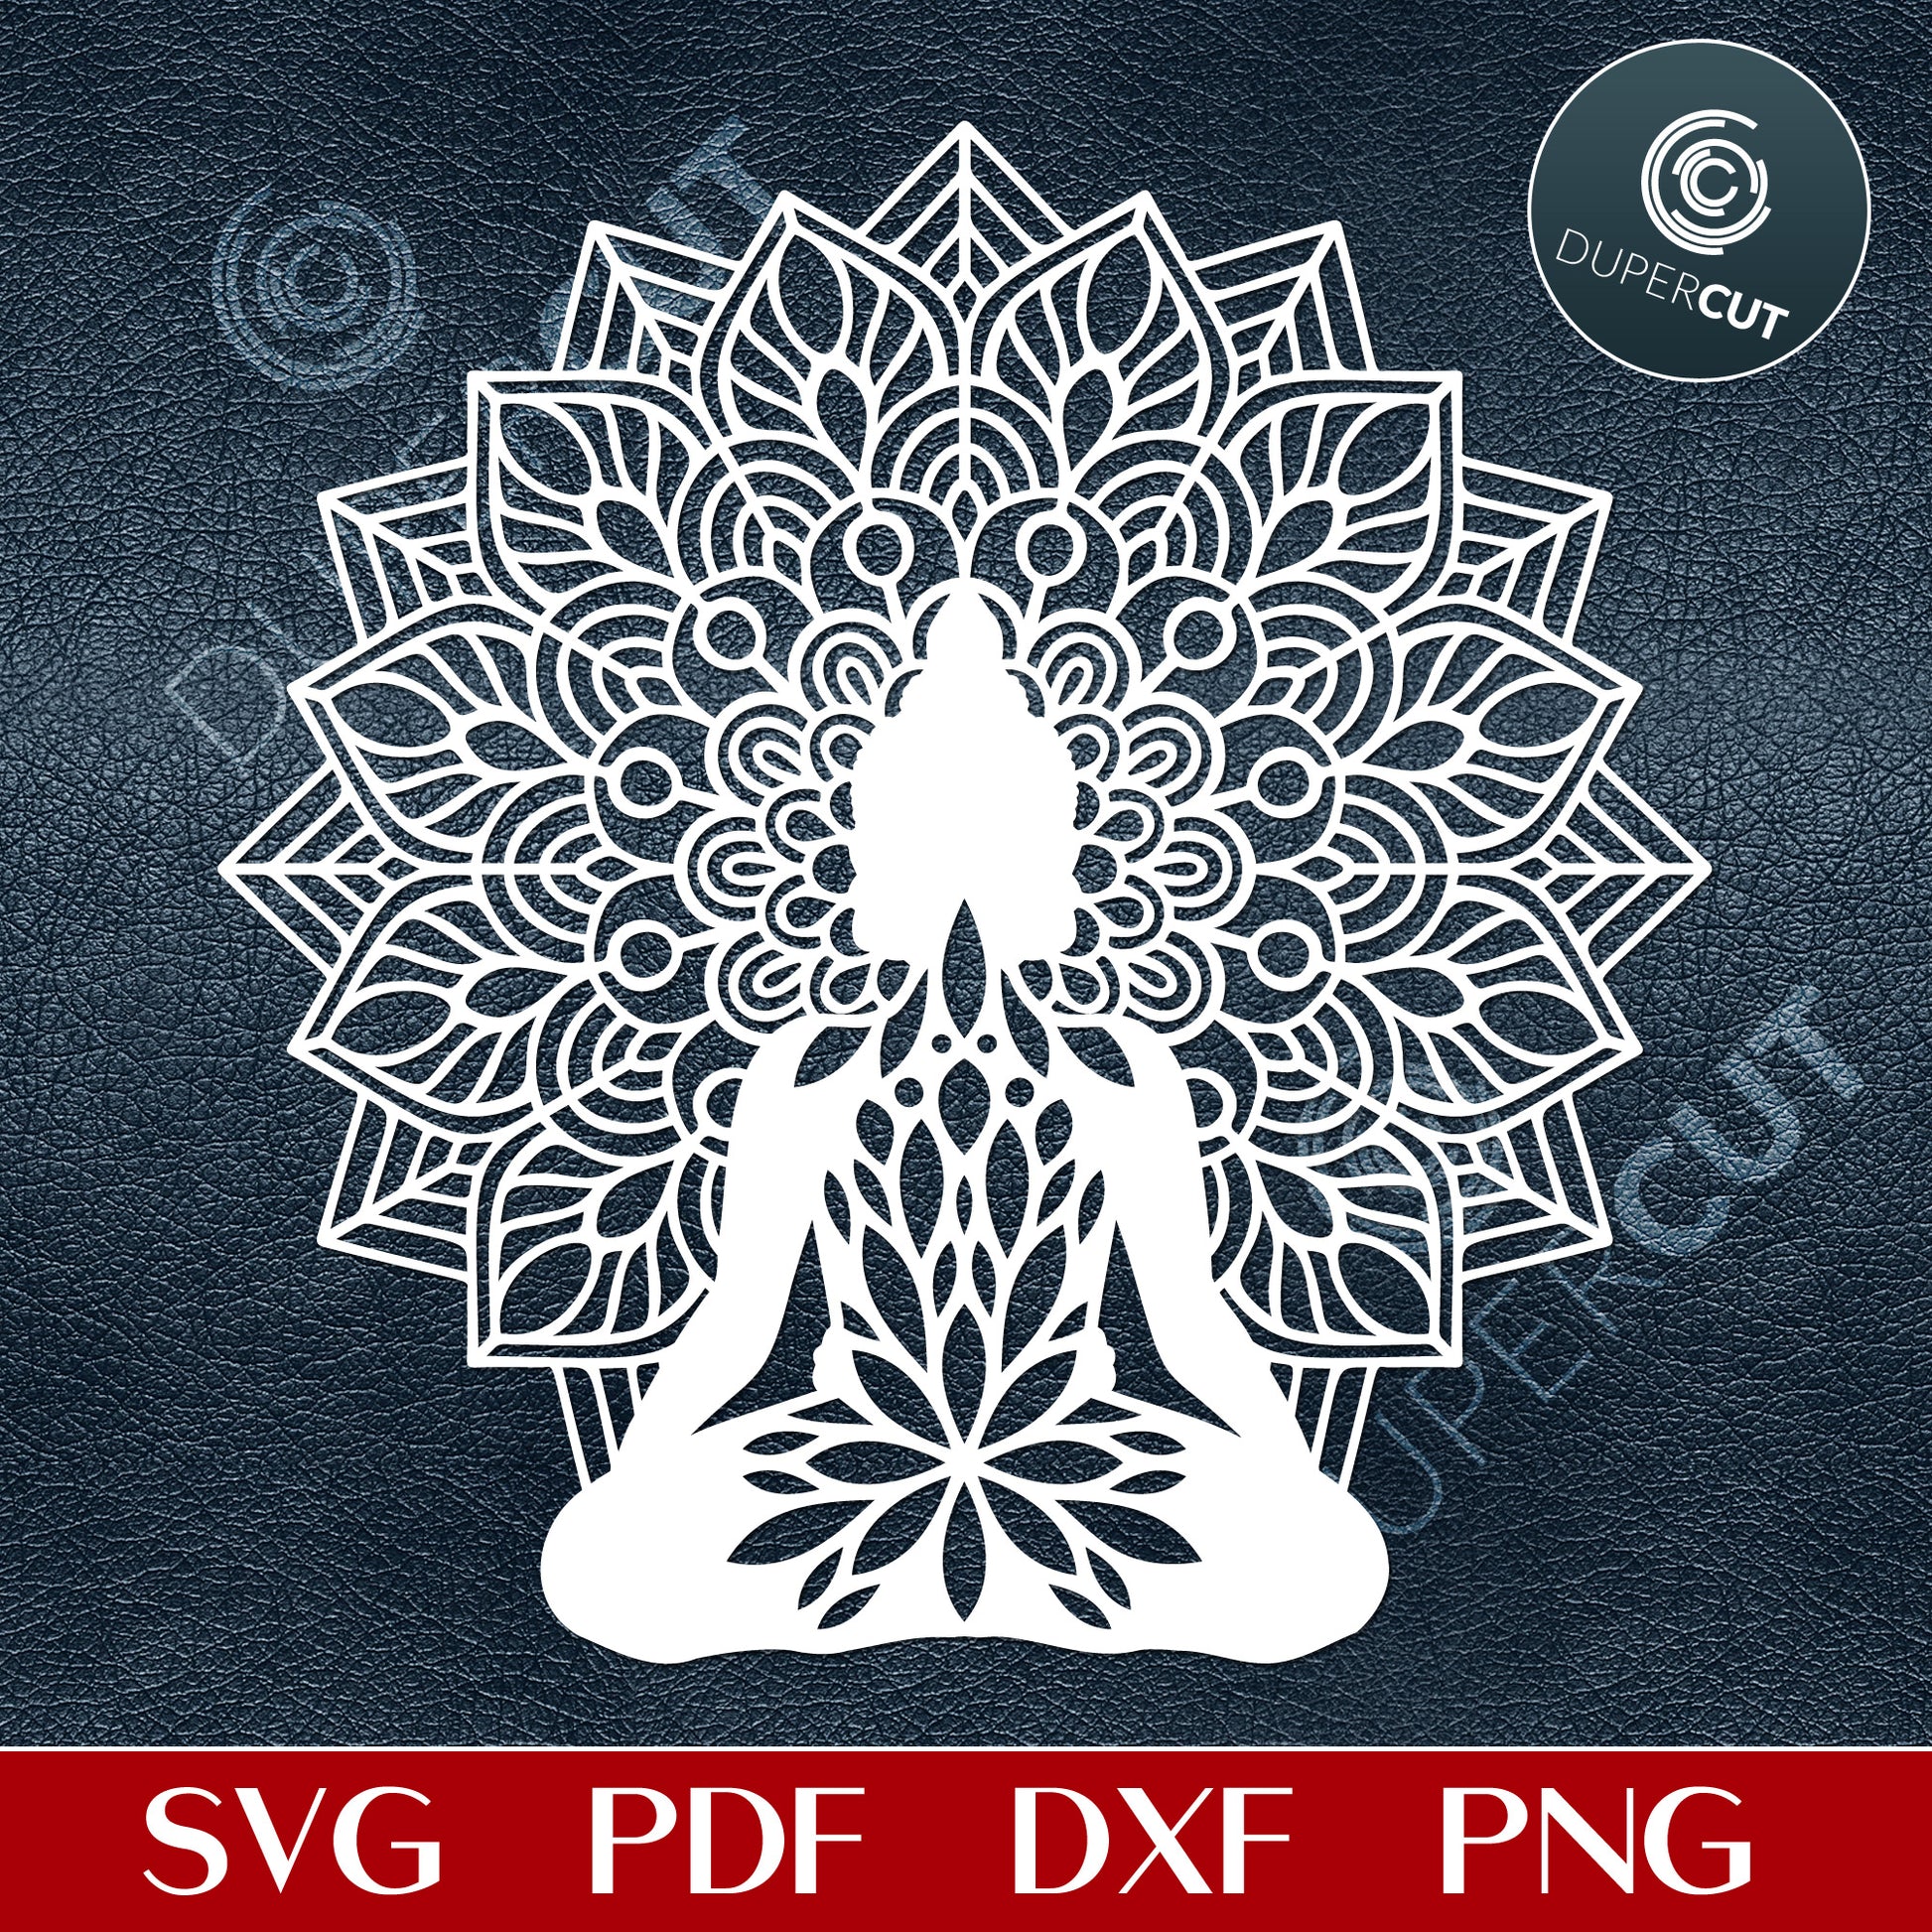 Abstract Buddha with mandala - SVG DXF PNG files for Cricut, Silhouette Cameo, Glowforge. For cutting machines, laser engraving, printing, mold making.